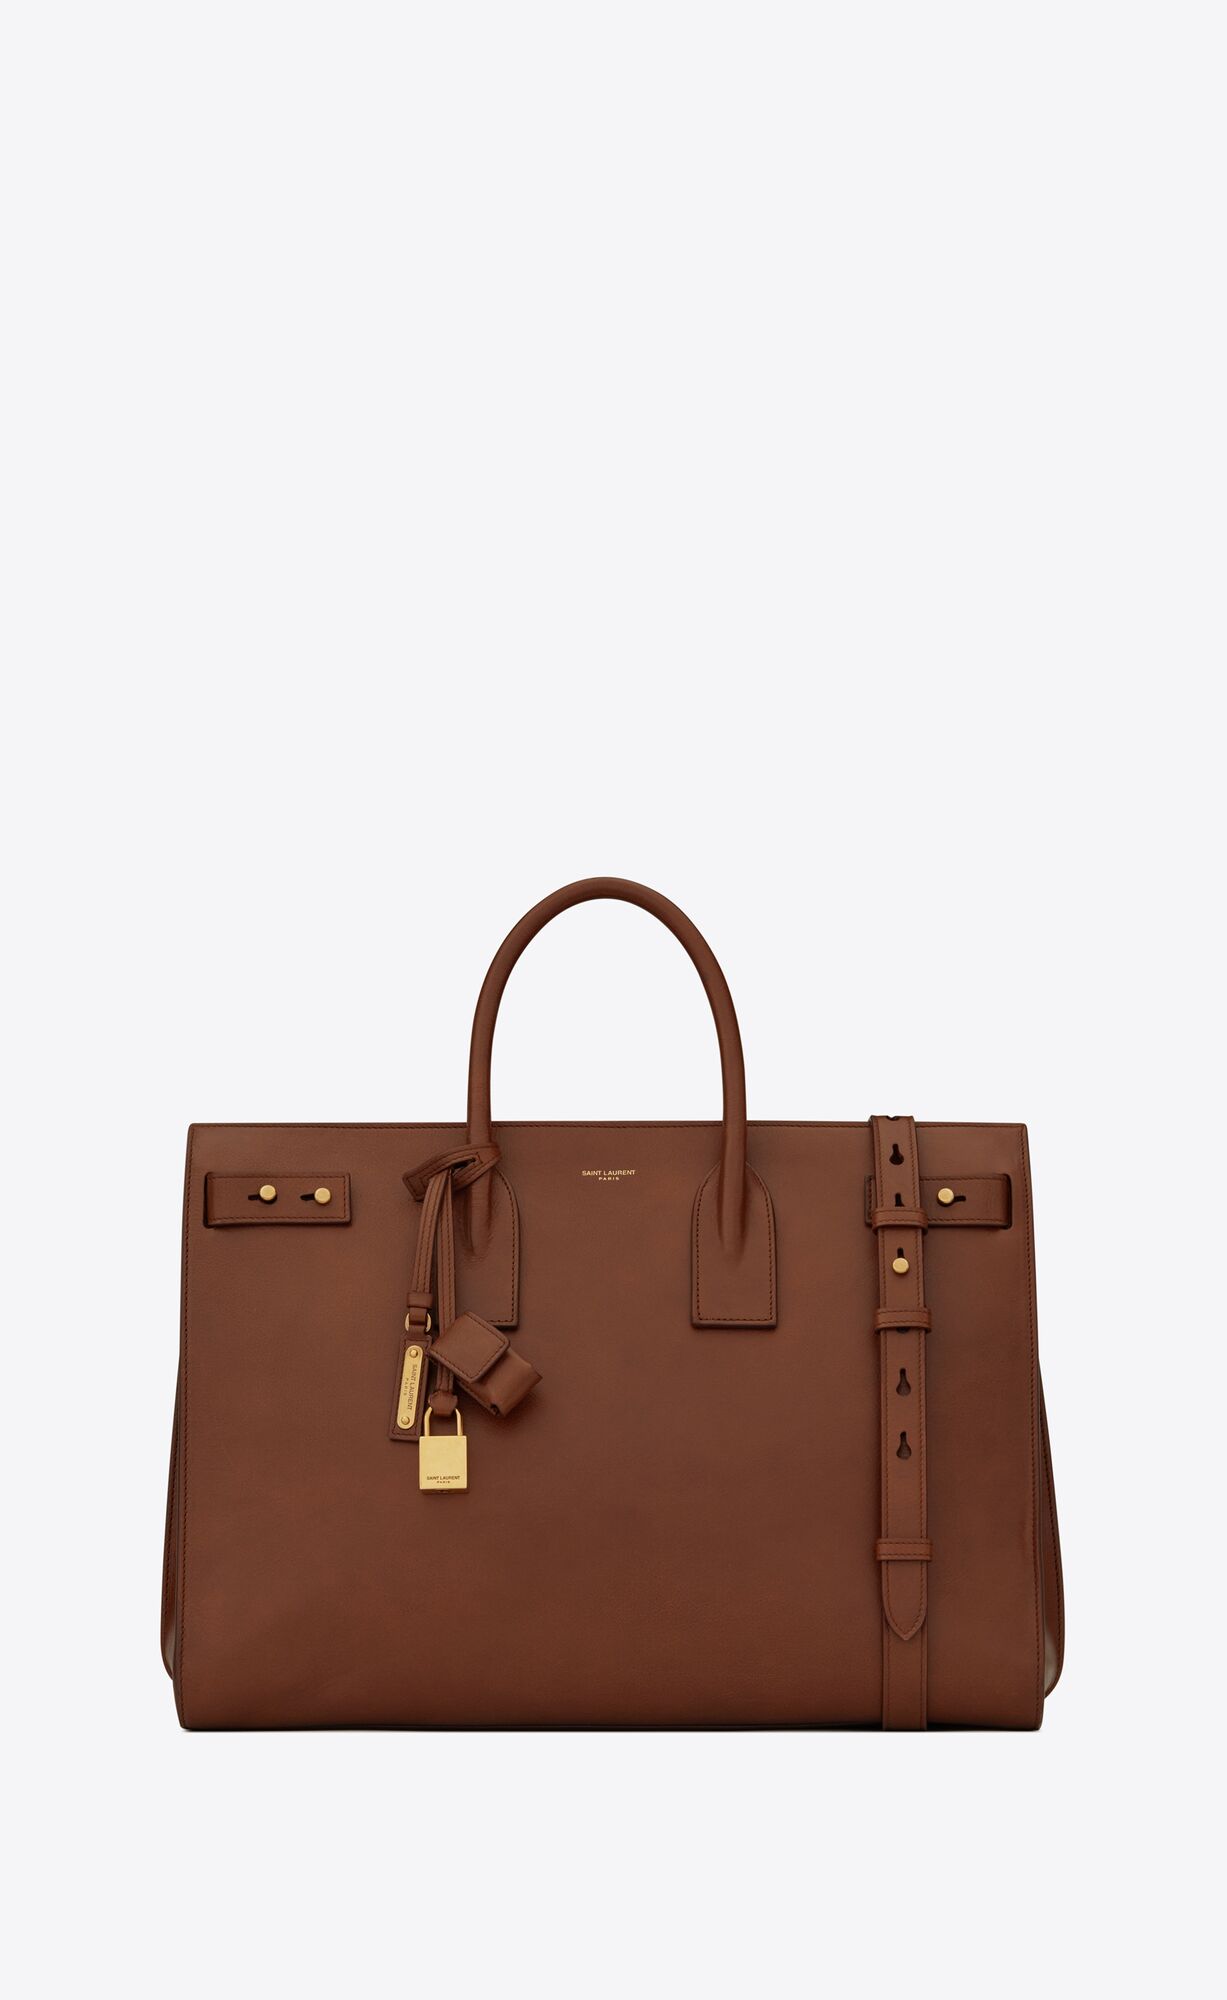 Saint Laurent Sac De Jour Thin Large In Smooth Leather – Toasted Brown – 6315262TF0W2126